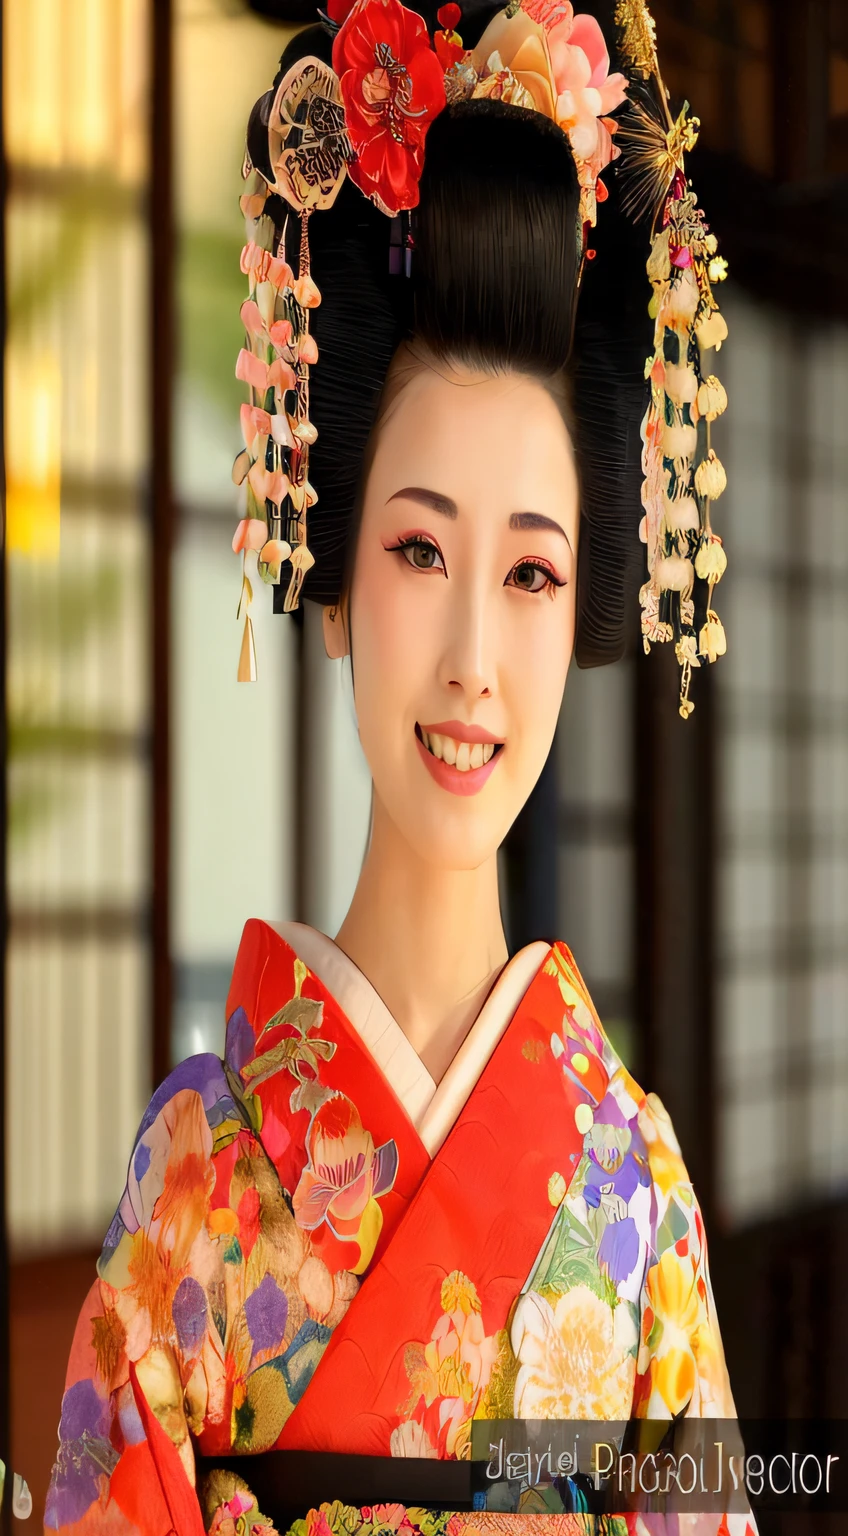 A woman made up in the traditional geisha style, with an elaborate hairstyle  and floral hair clips, Stock Photo by Mint_Images